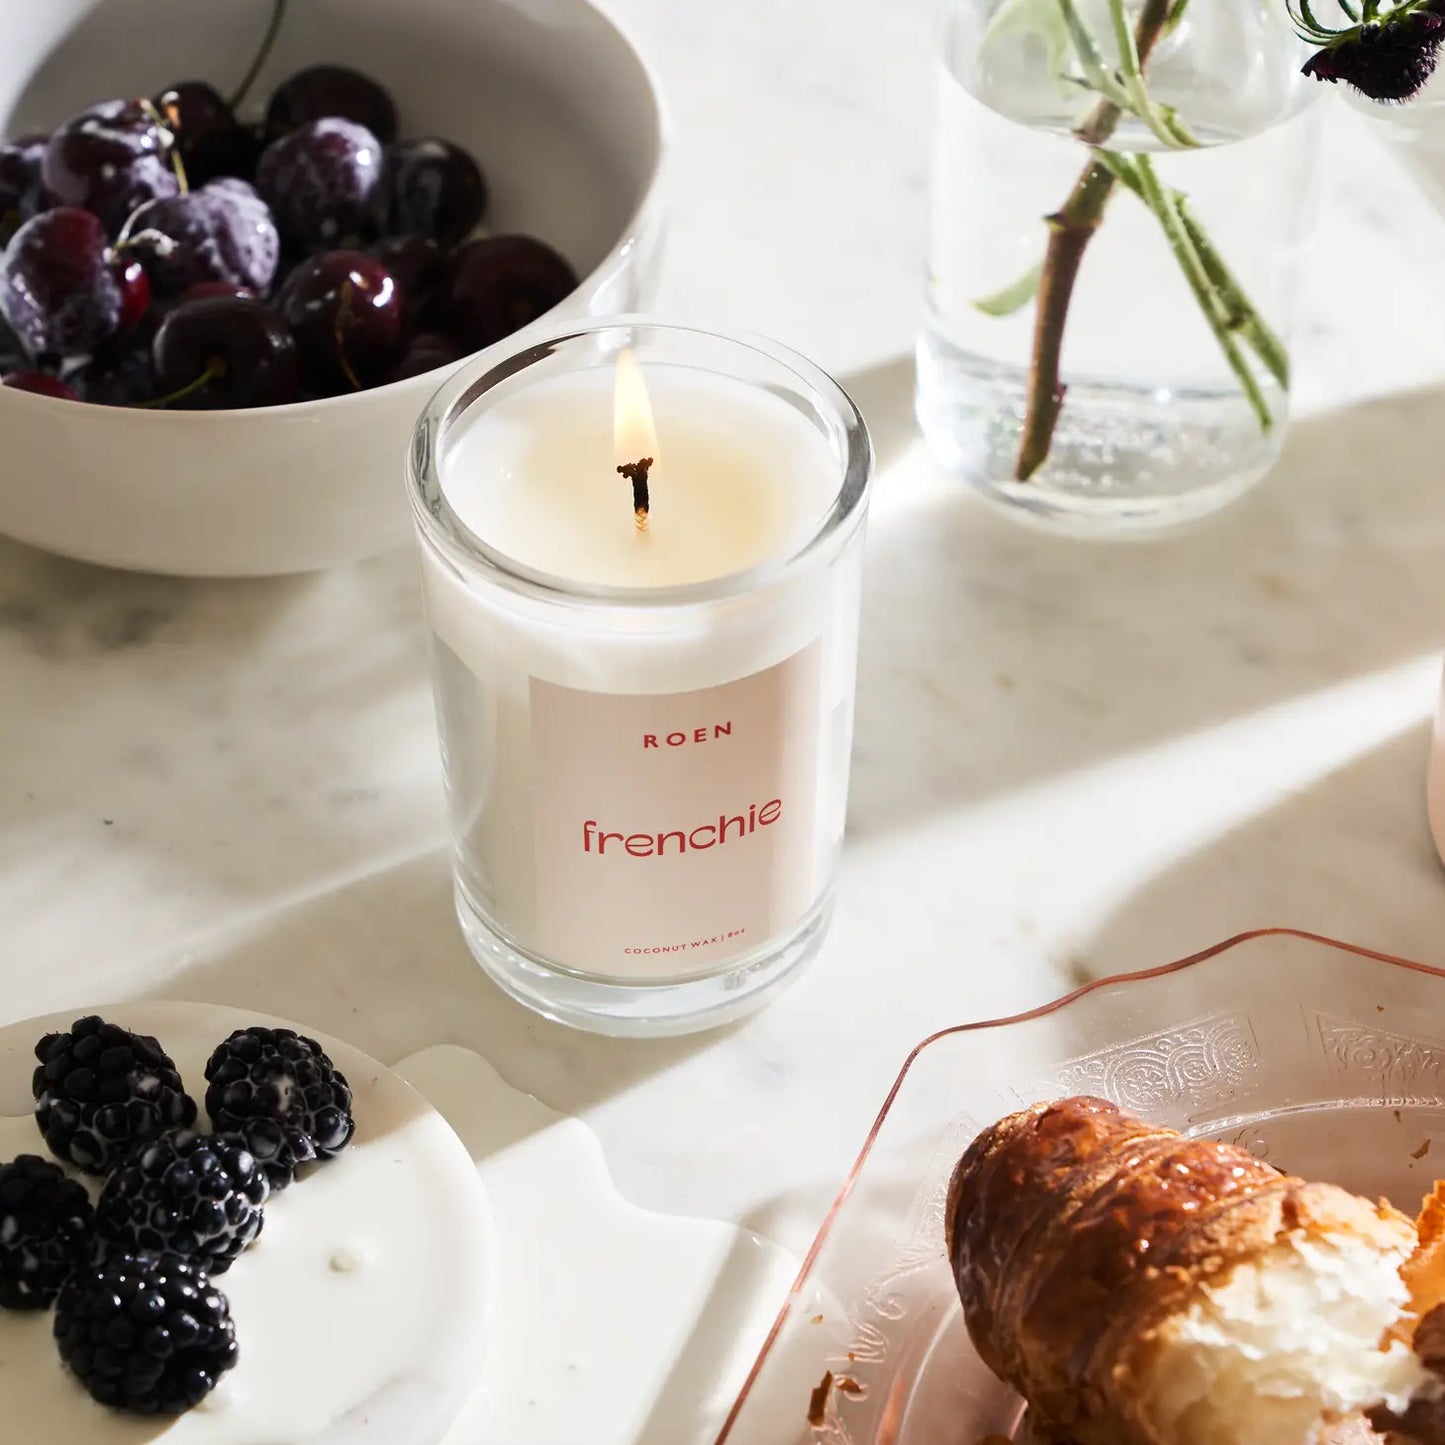 ROEN Frenchie Candle